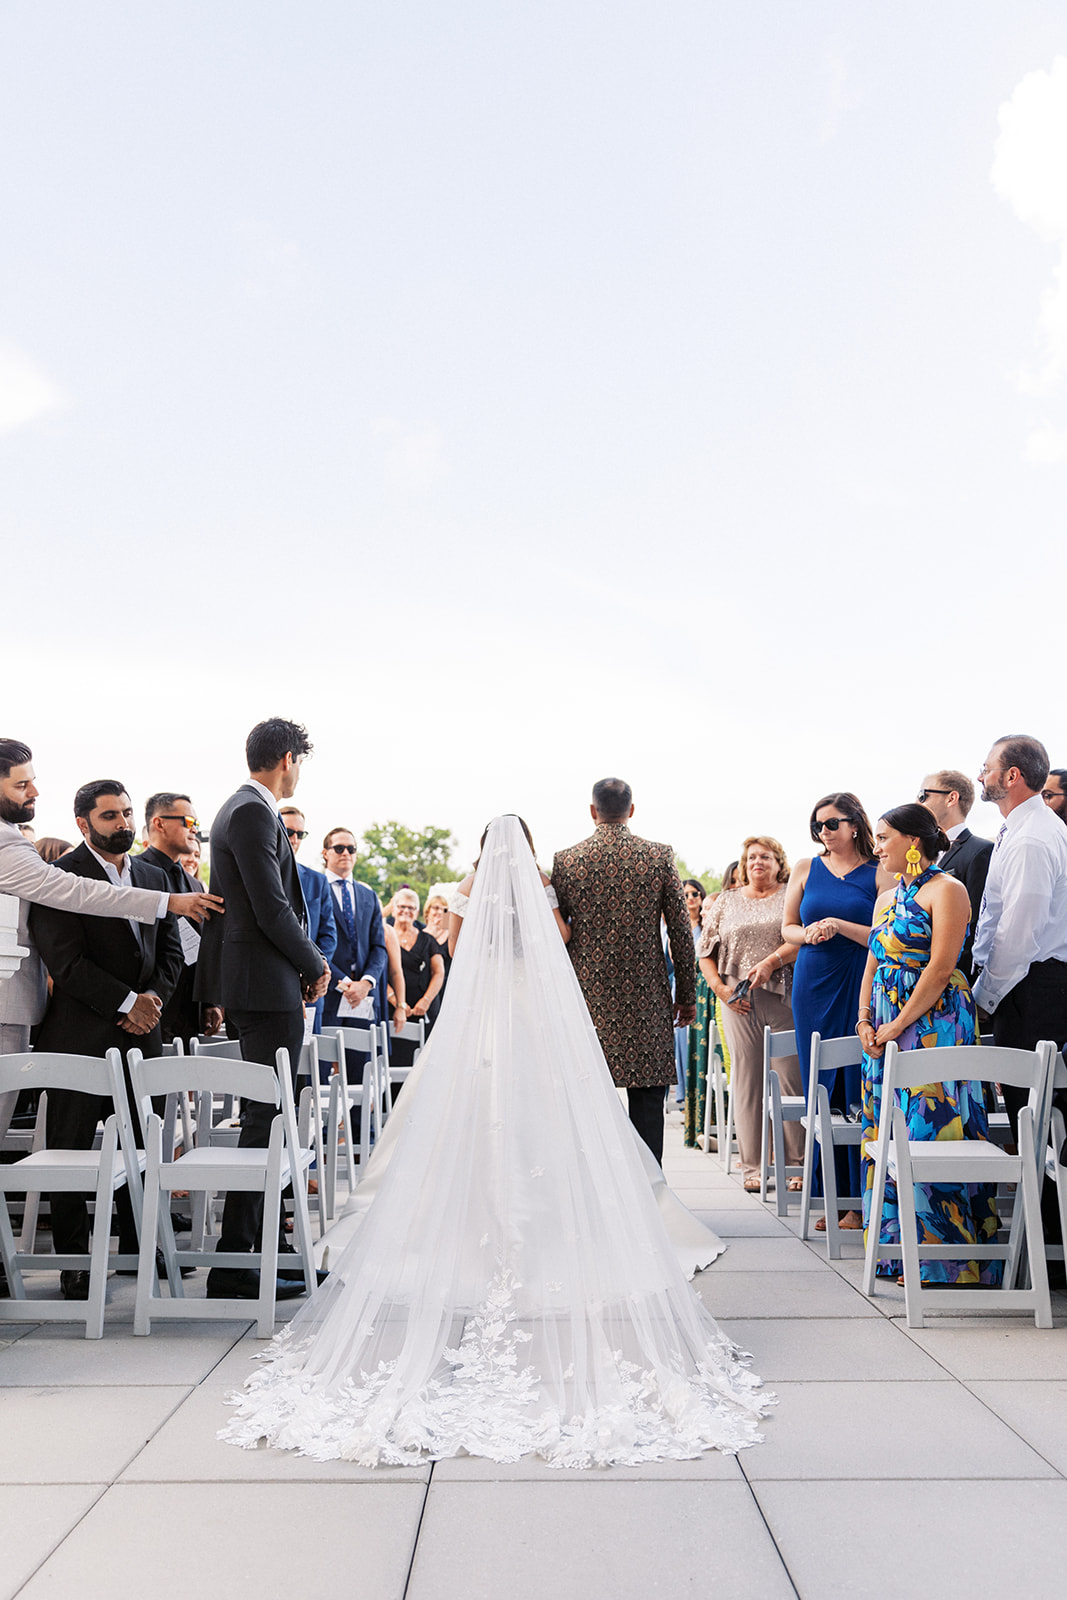 A father leads his bride down the aisle of her wedding